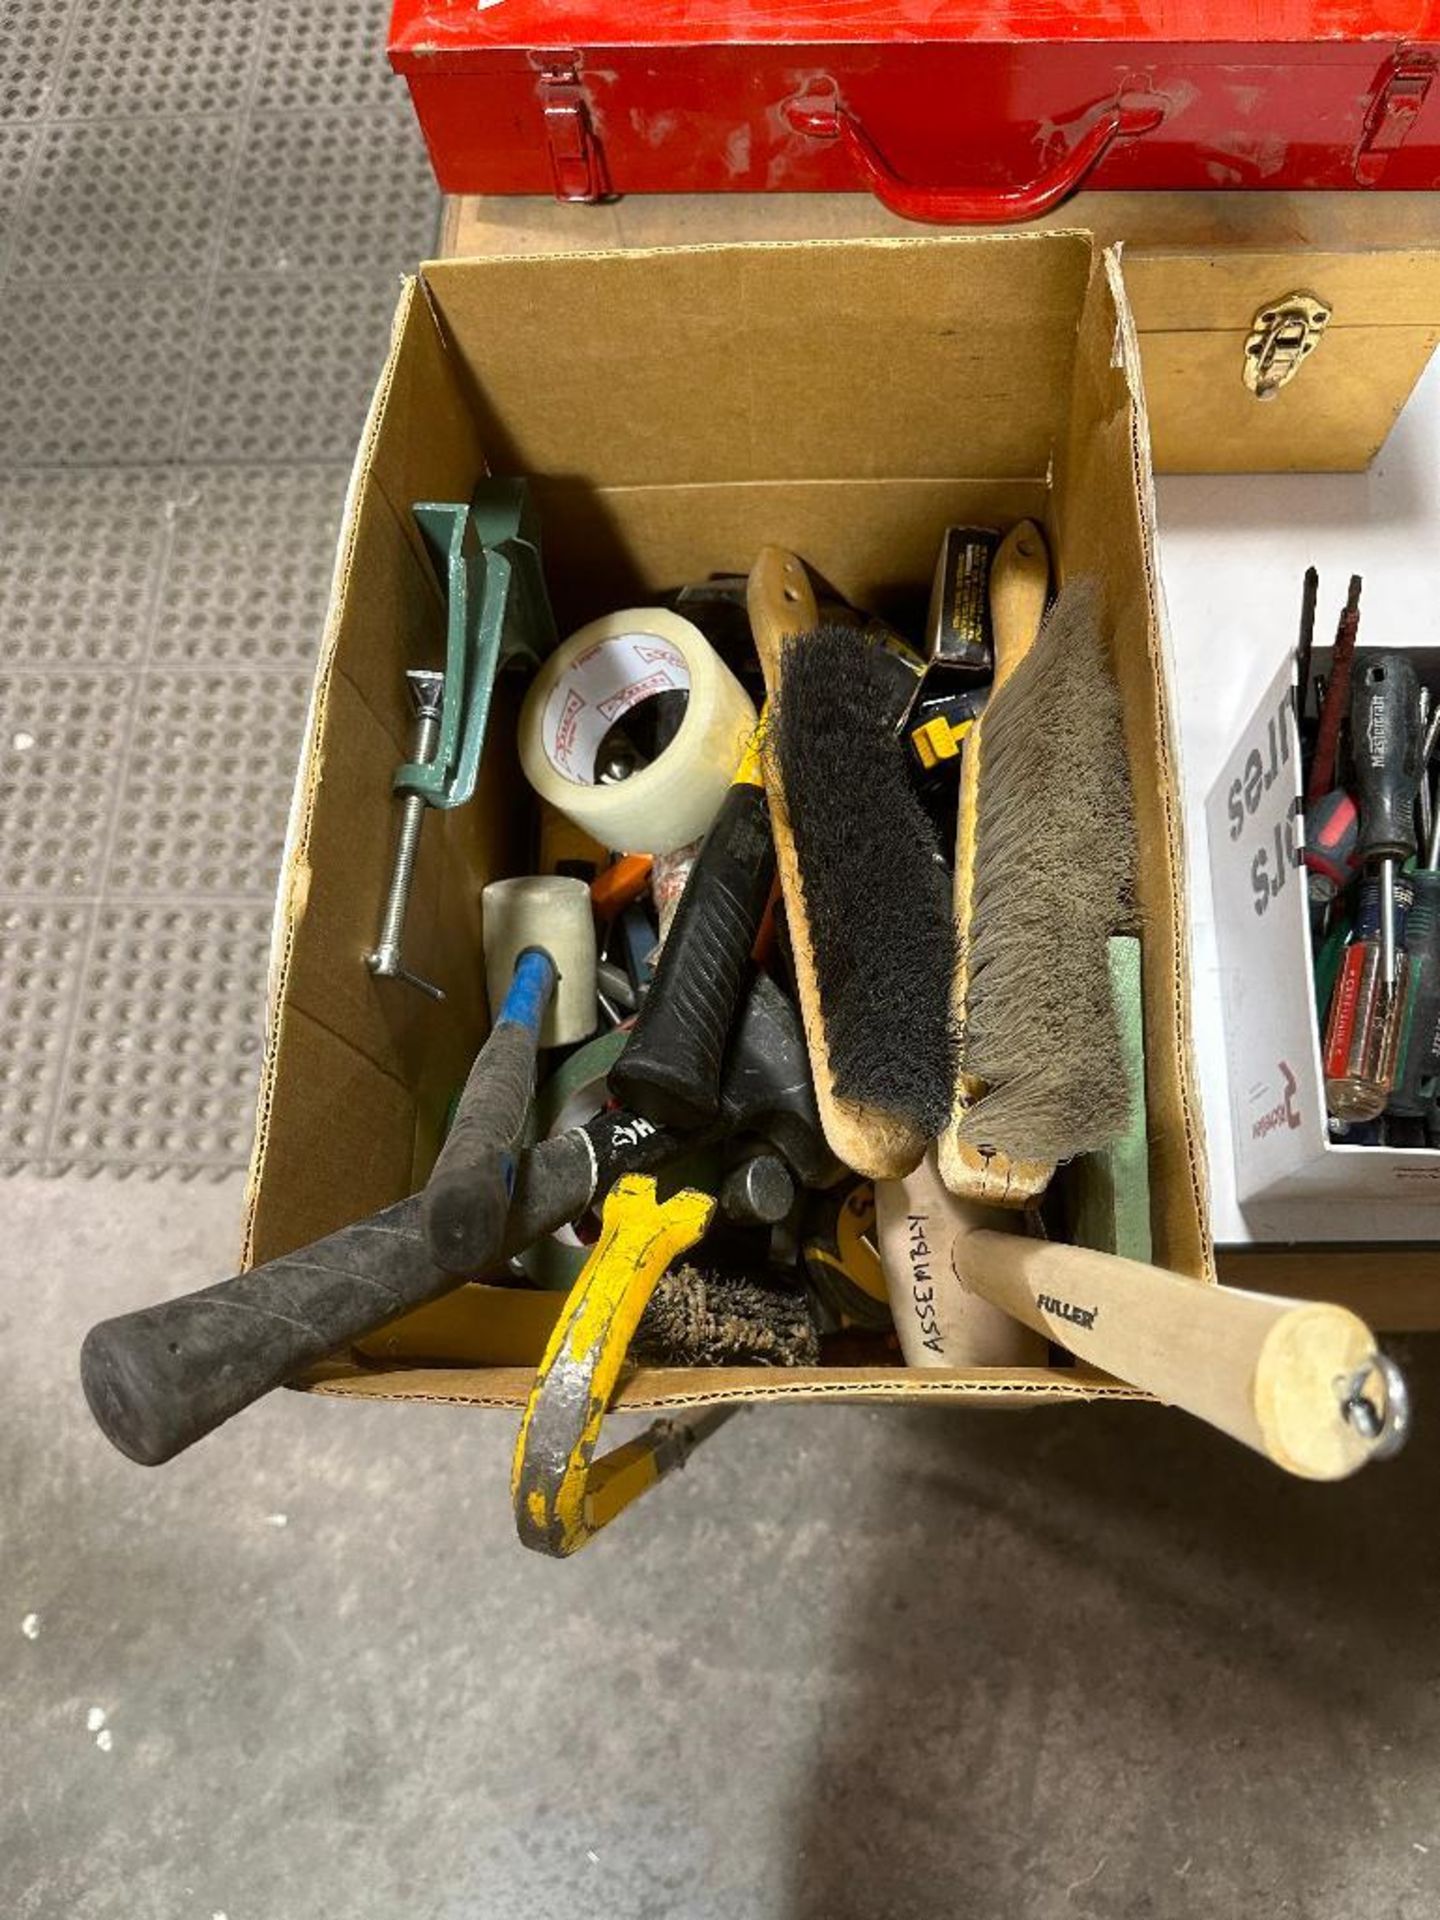 Box of Asst. Tools including Pry Bar, Tape, Brushes, Right Angle Clamp, etc. - Image 2 of 3